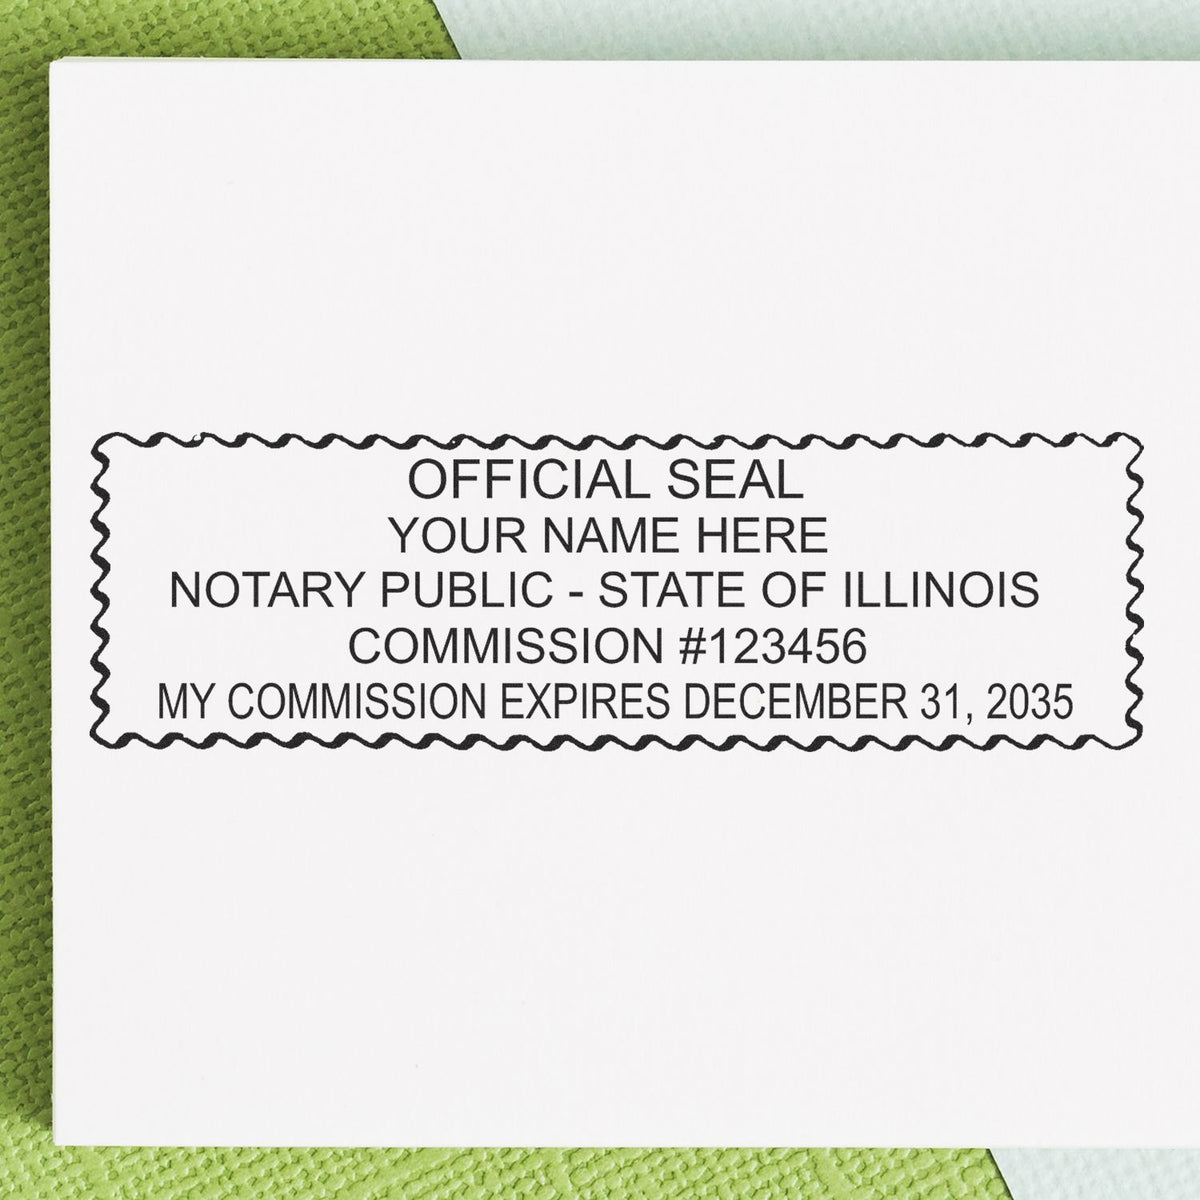 The Slim Pre-Inked Rectangular Notary Stamp for Illinois stamp impression comes to life with a crisp, detailed photo on paper - showcasing true professional quality.